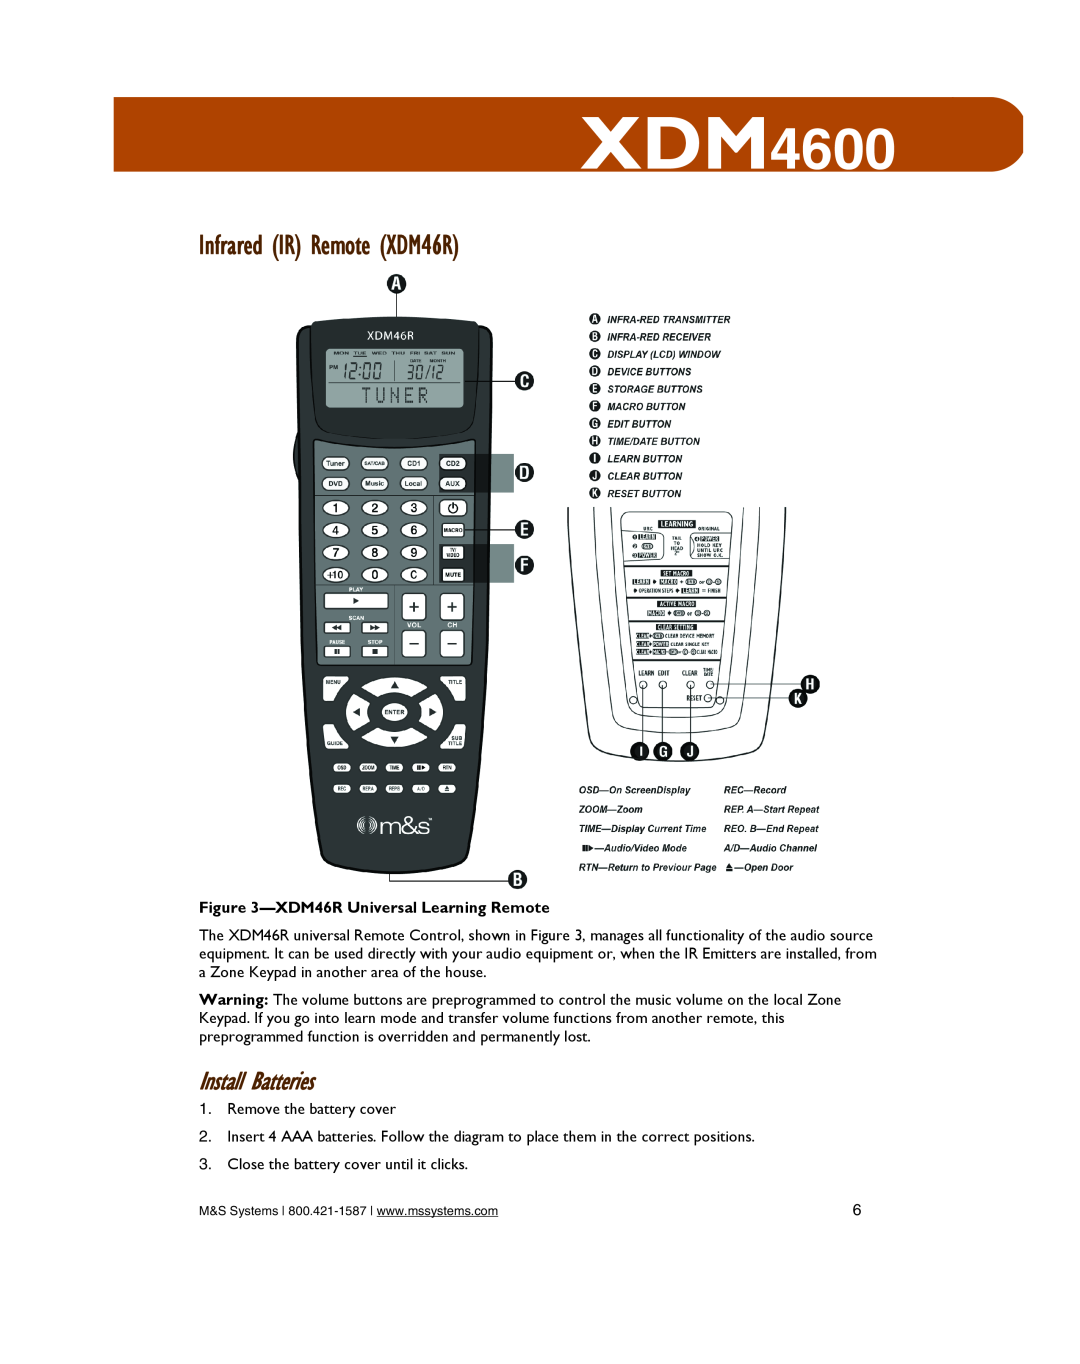 M&S Systems XDM4600 owner manual Infrared IR Remote XDM46R, Install Batteries, XDM46RUniversal Learning Remote 